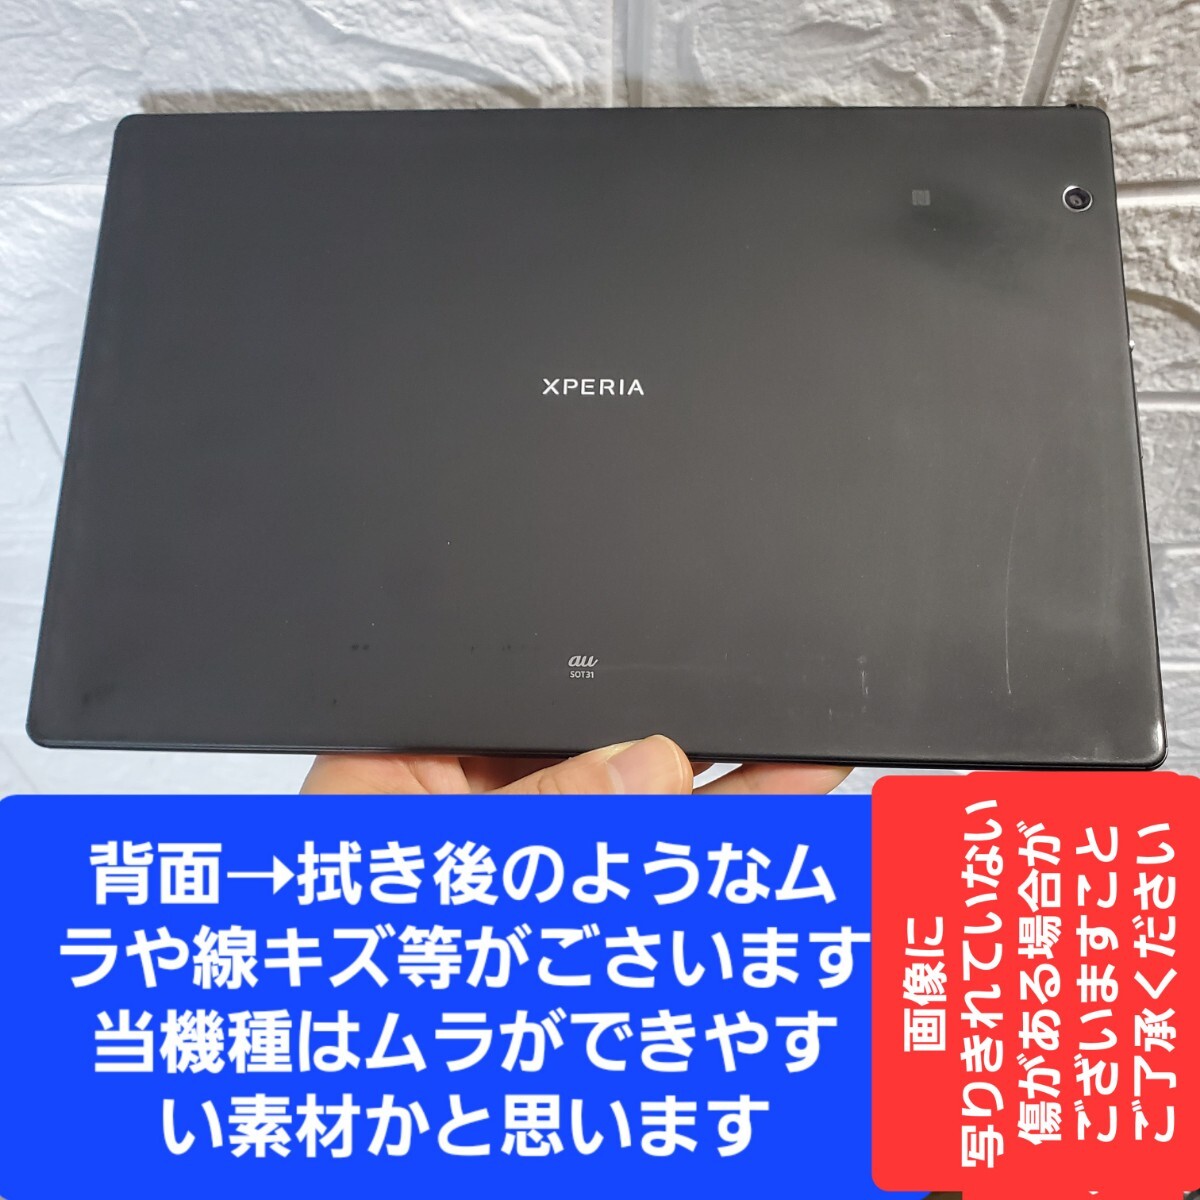 ①Xperia Z4 Tablet AU SOT31 バッテリー能力は新品級 フルセグTV 重さ393g 2k解像度 利用制限◯ 防水 Android7.0